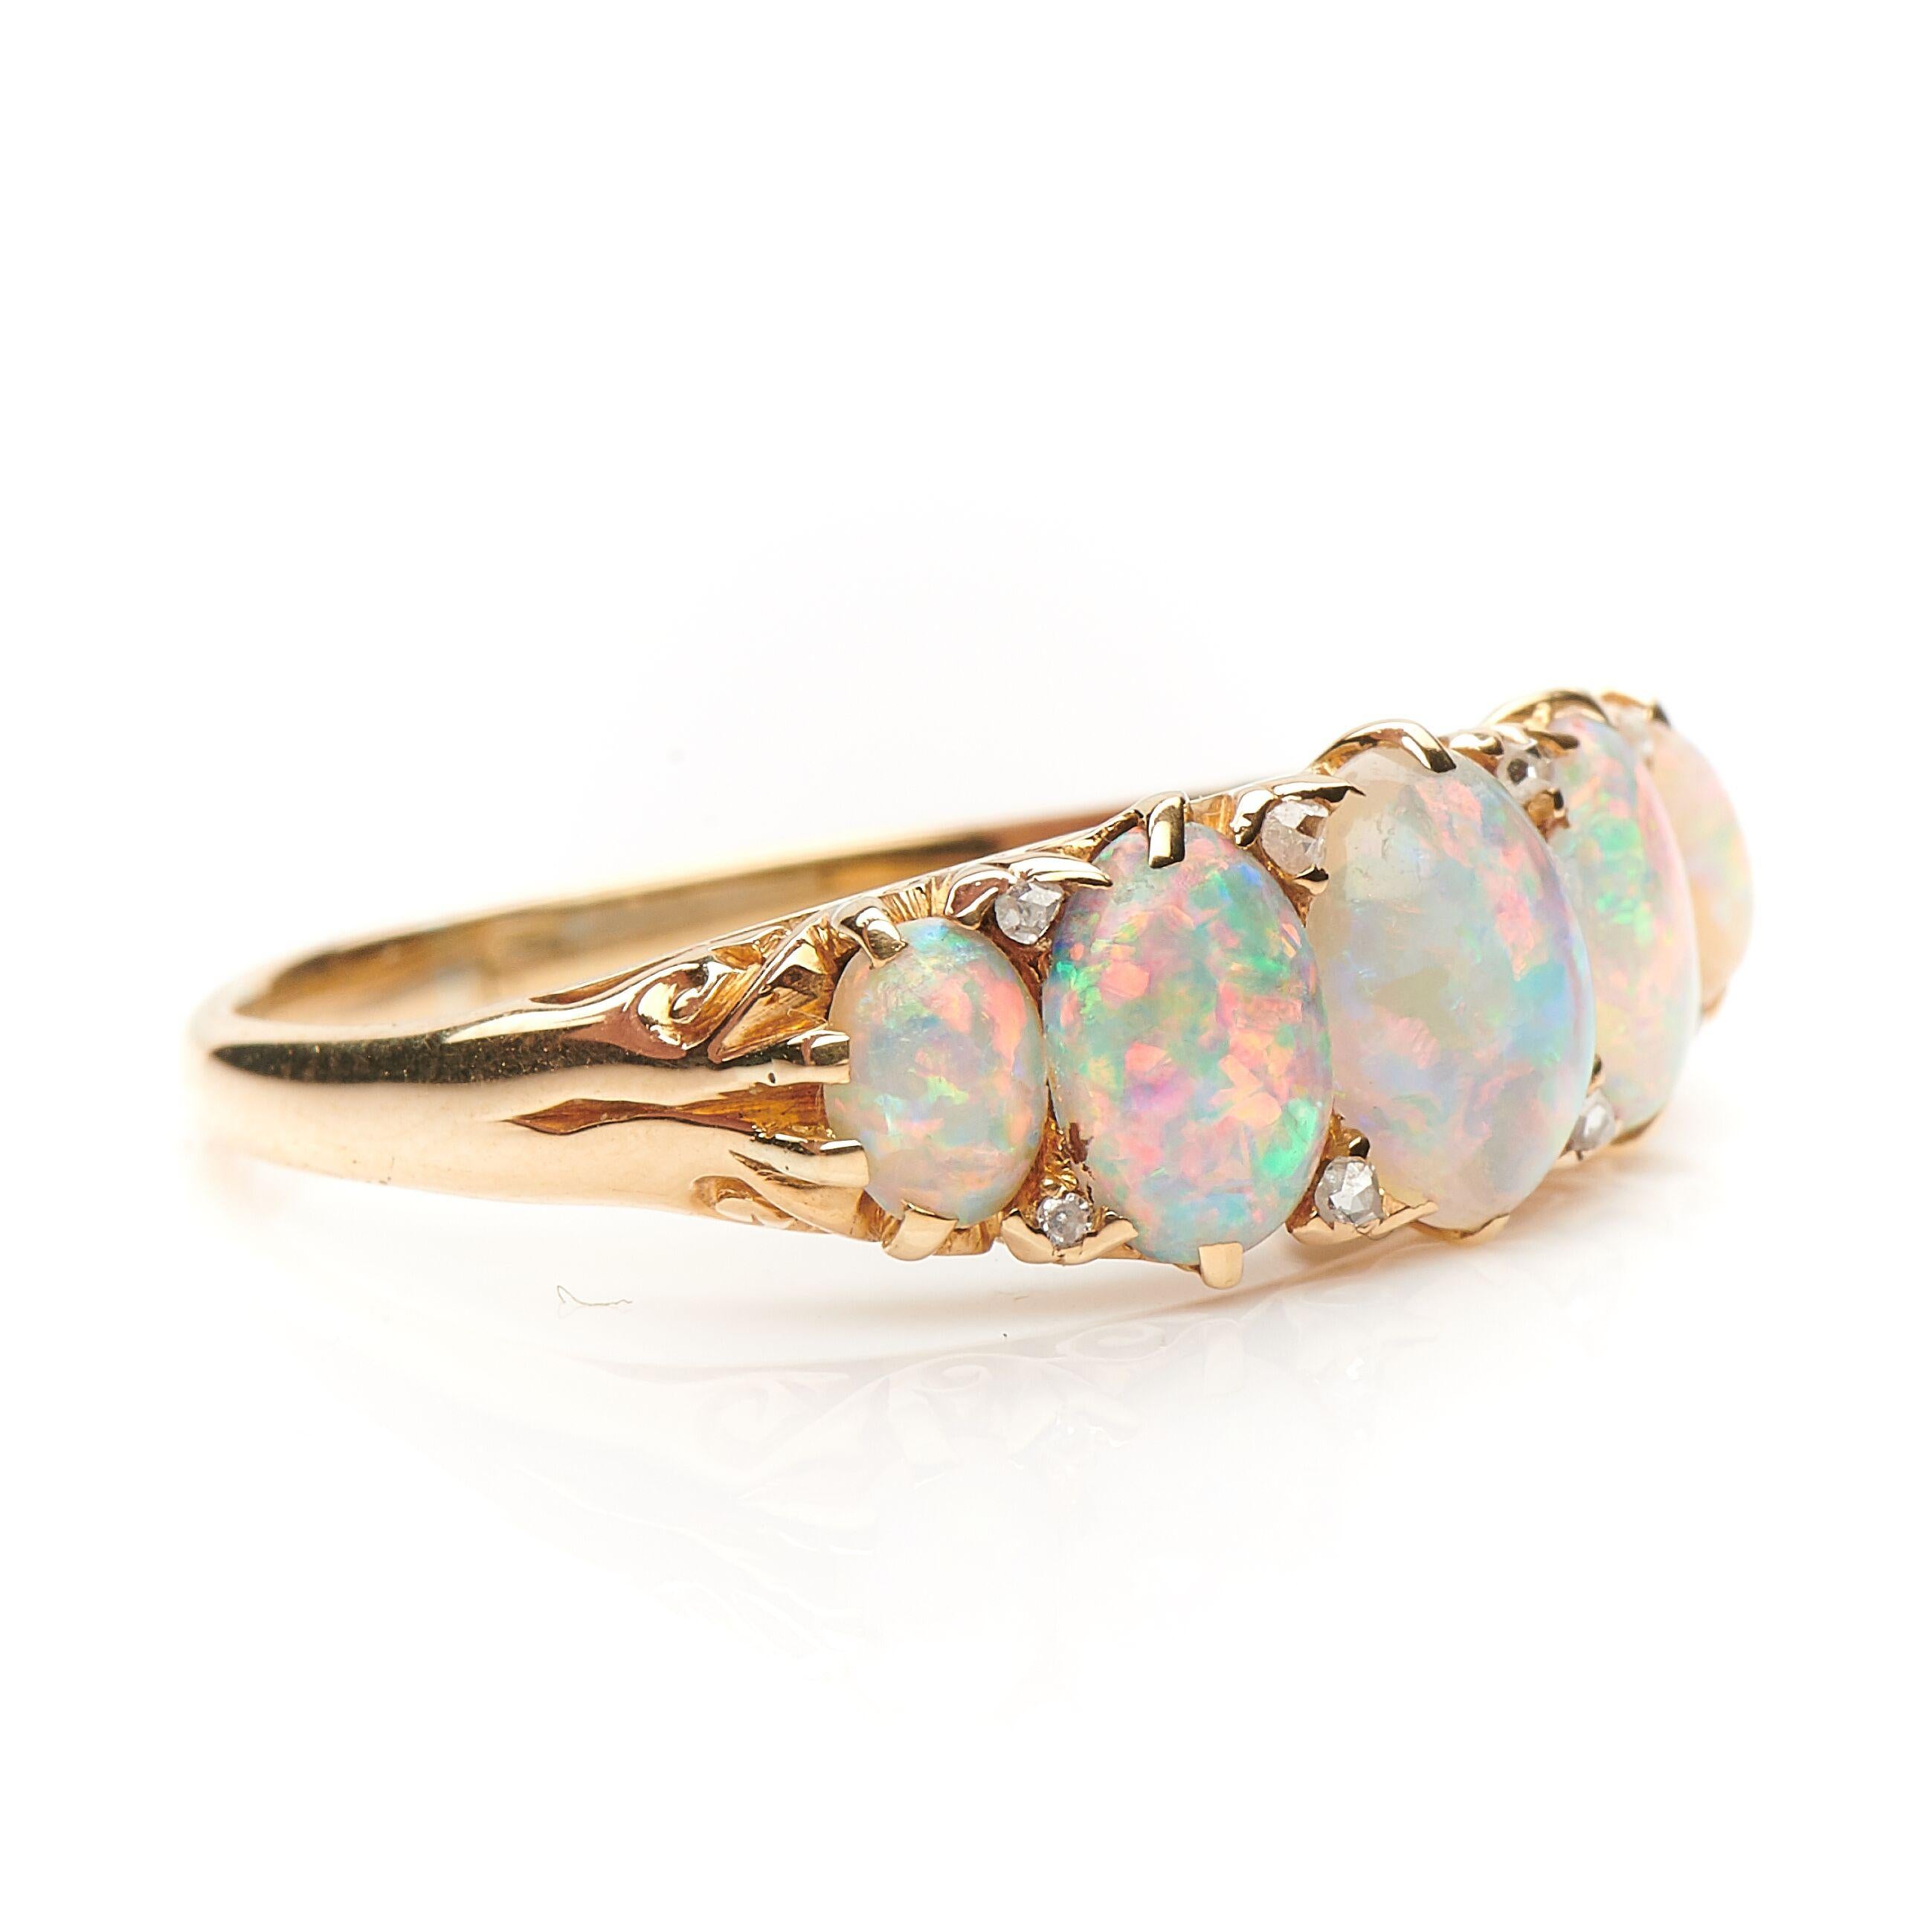 Victorian, opal and diamond carved half hoop ring. Set with five incredible opals with a exceptional range of colour - the photographs do not do this ring justice! Interspersed with little diamonds. The setting is beautifully carved from 18ct gold